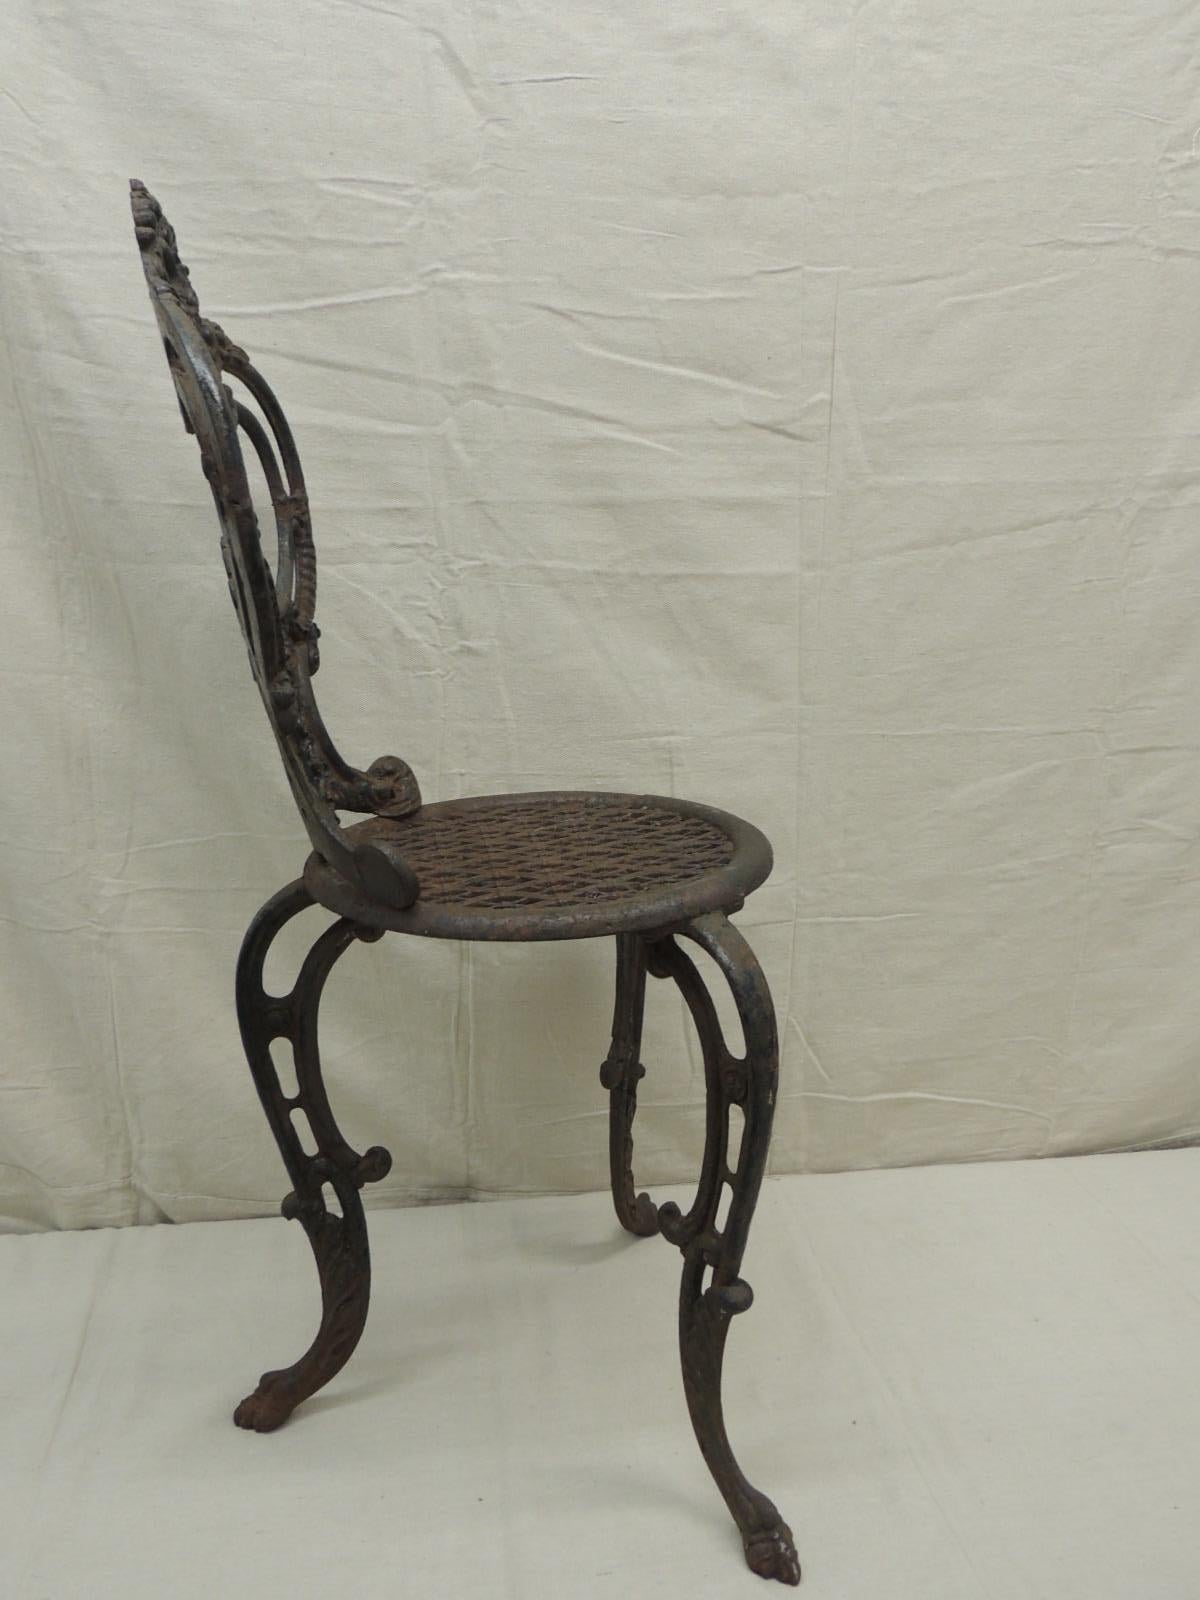 Hand-Crafted Antique Rustic Victorian Garden Chair